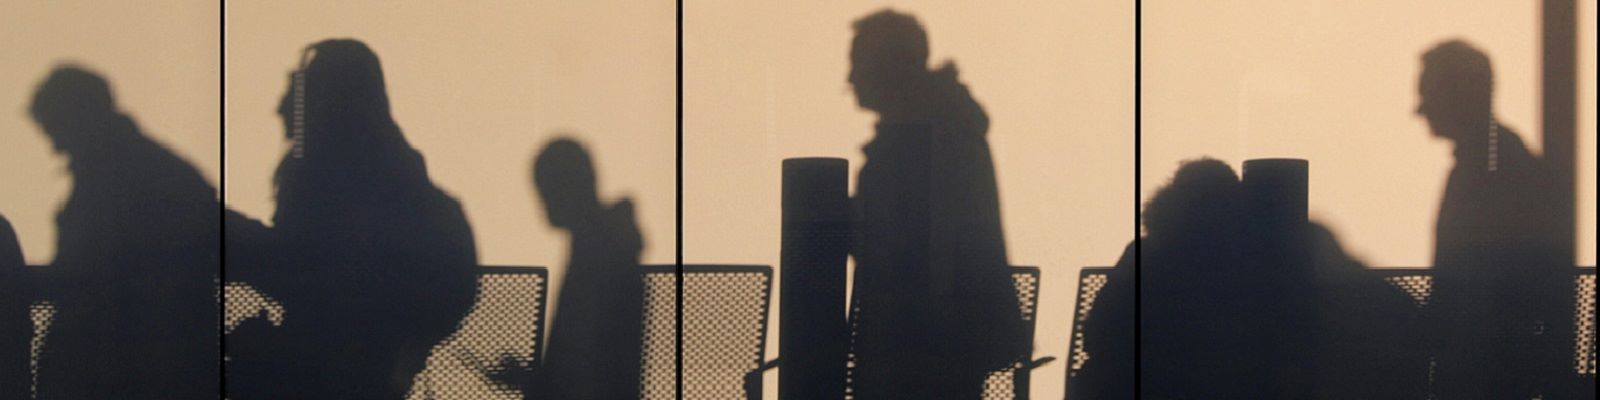 Silhouettes of people moving through an airport